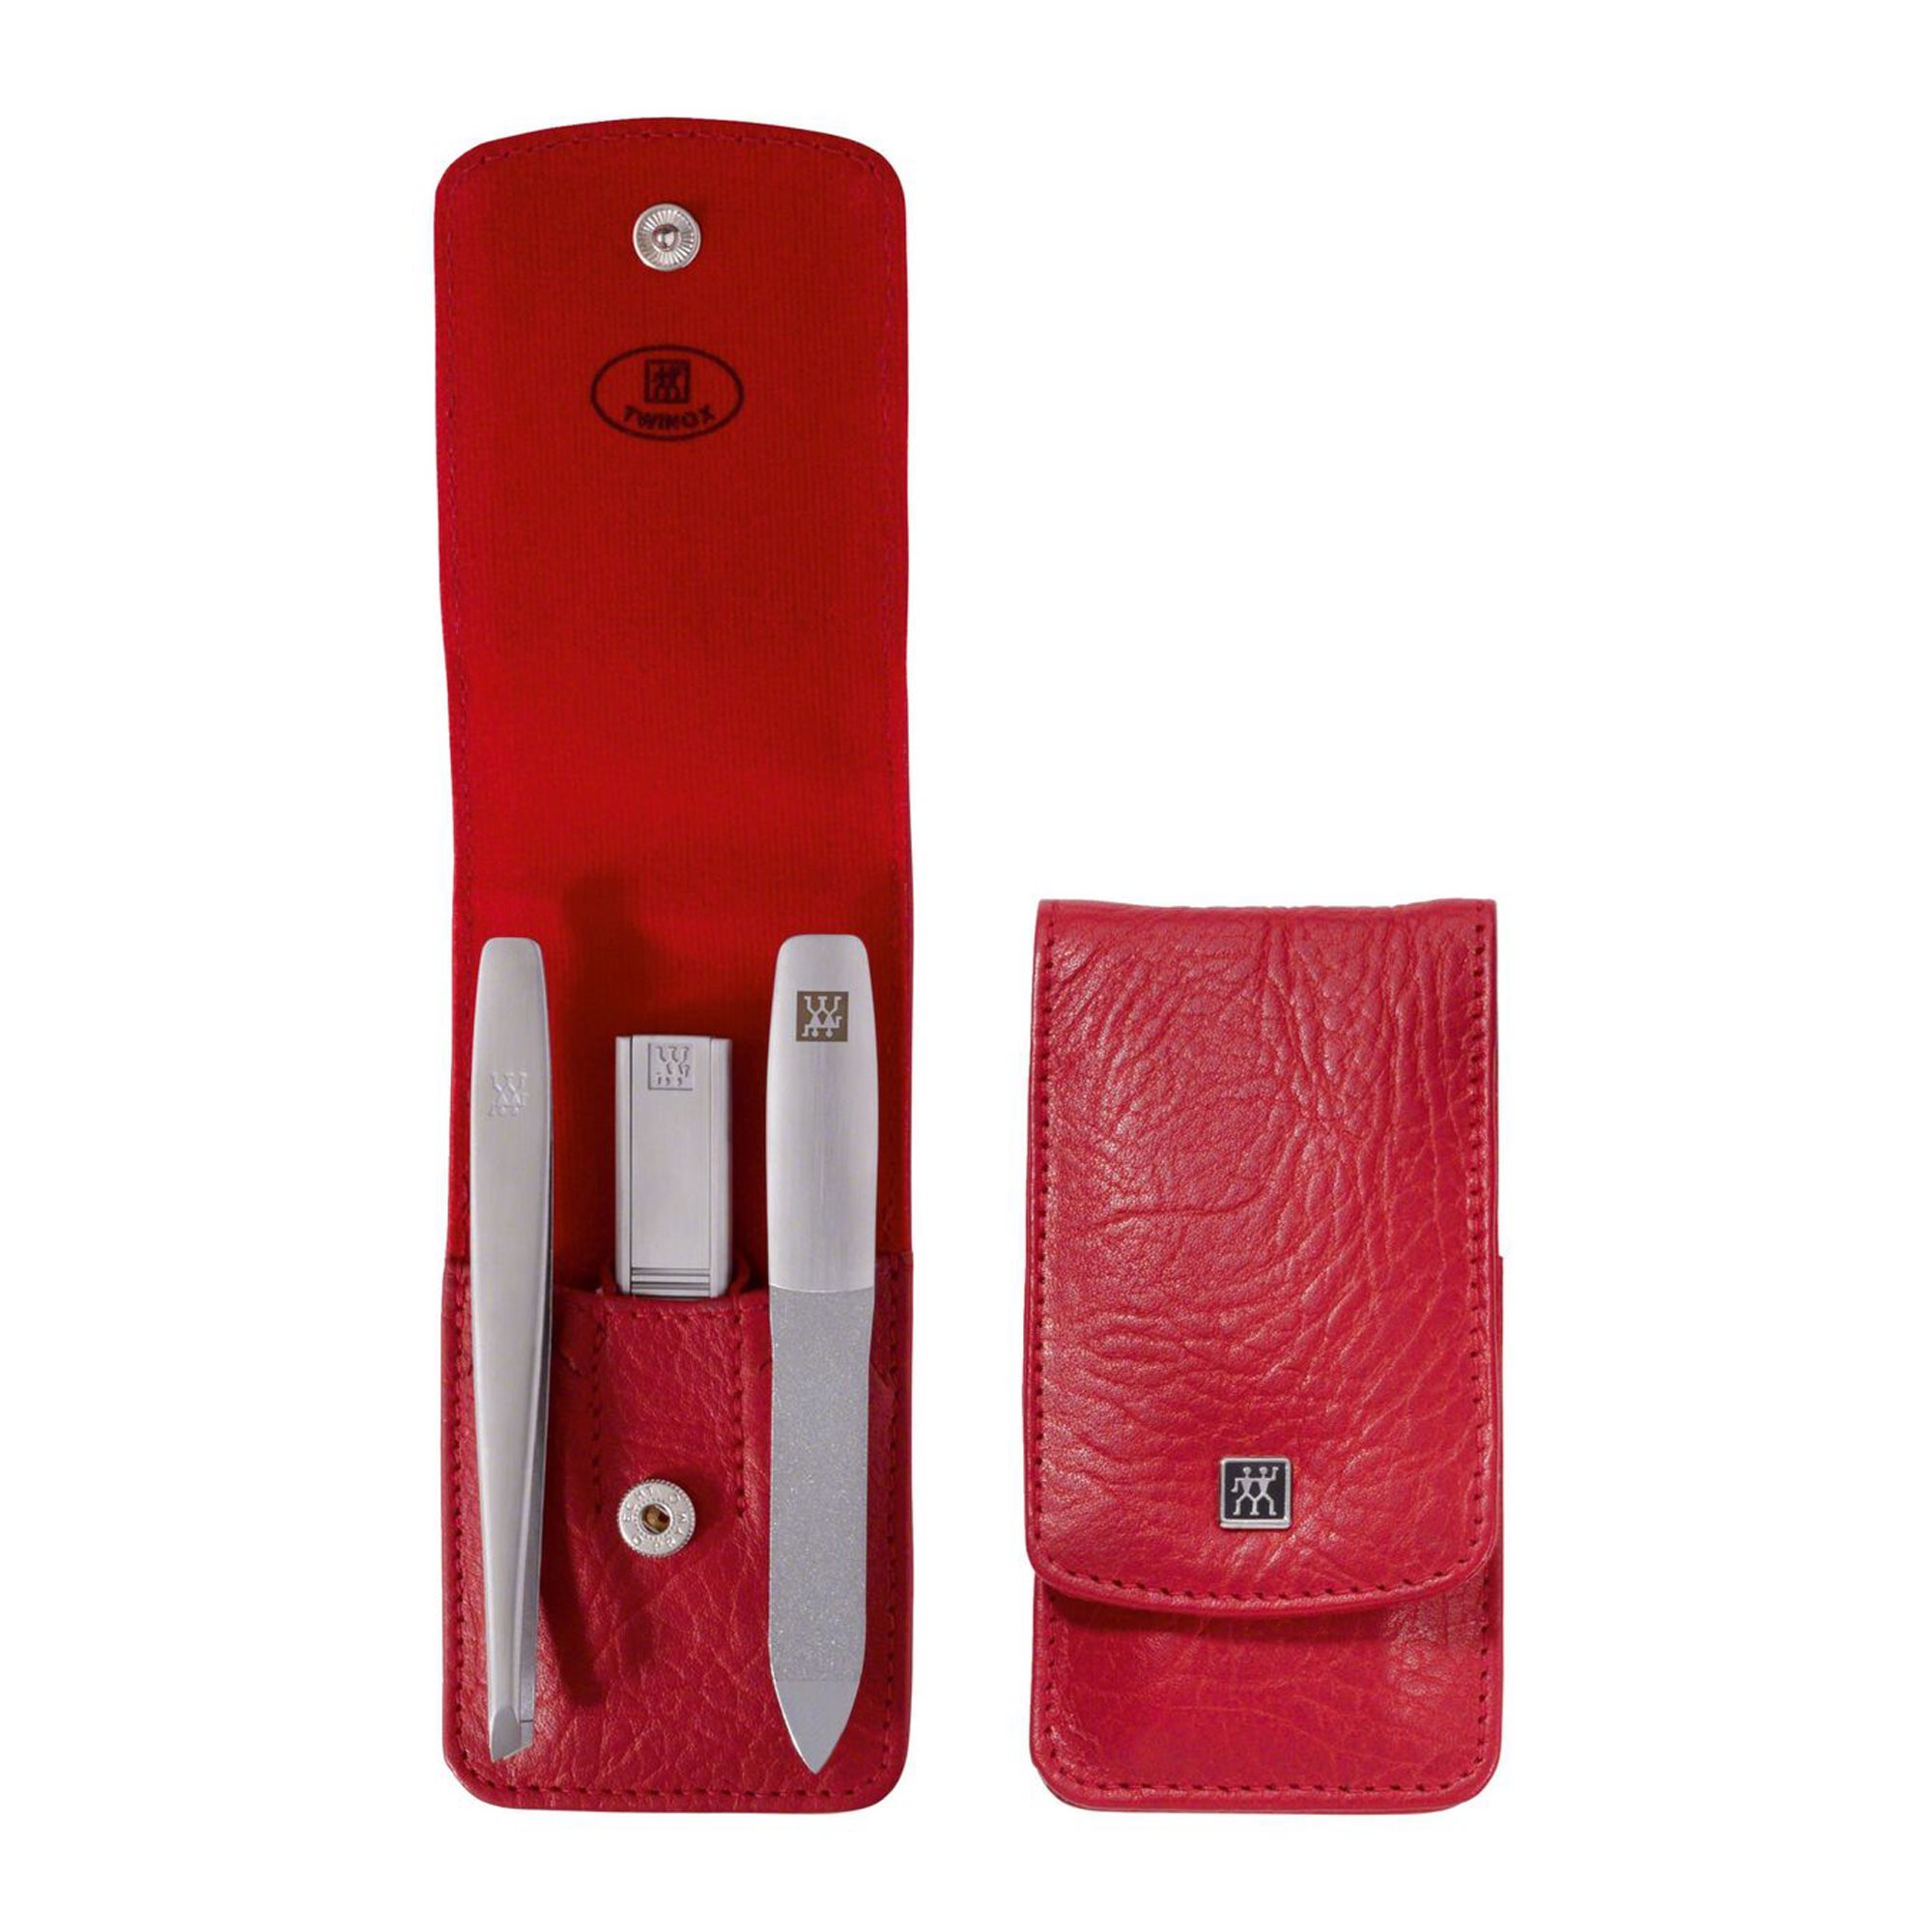 3-piece manicure set, stainless steel, red Zwilling case, TWINOX leather KitchenShop - 